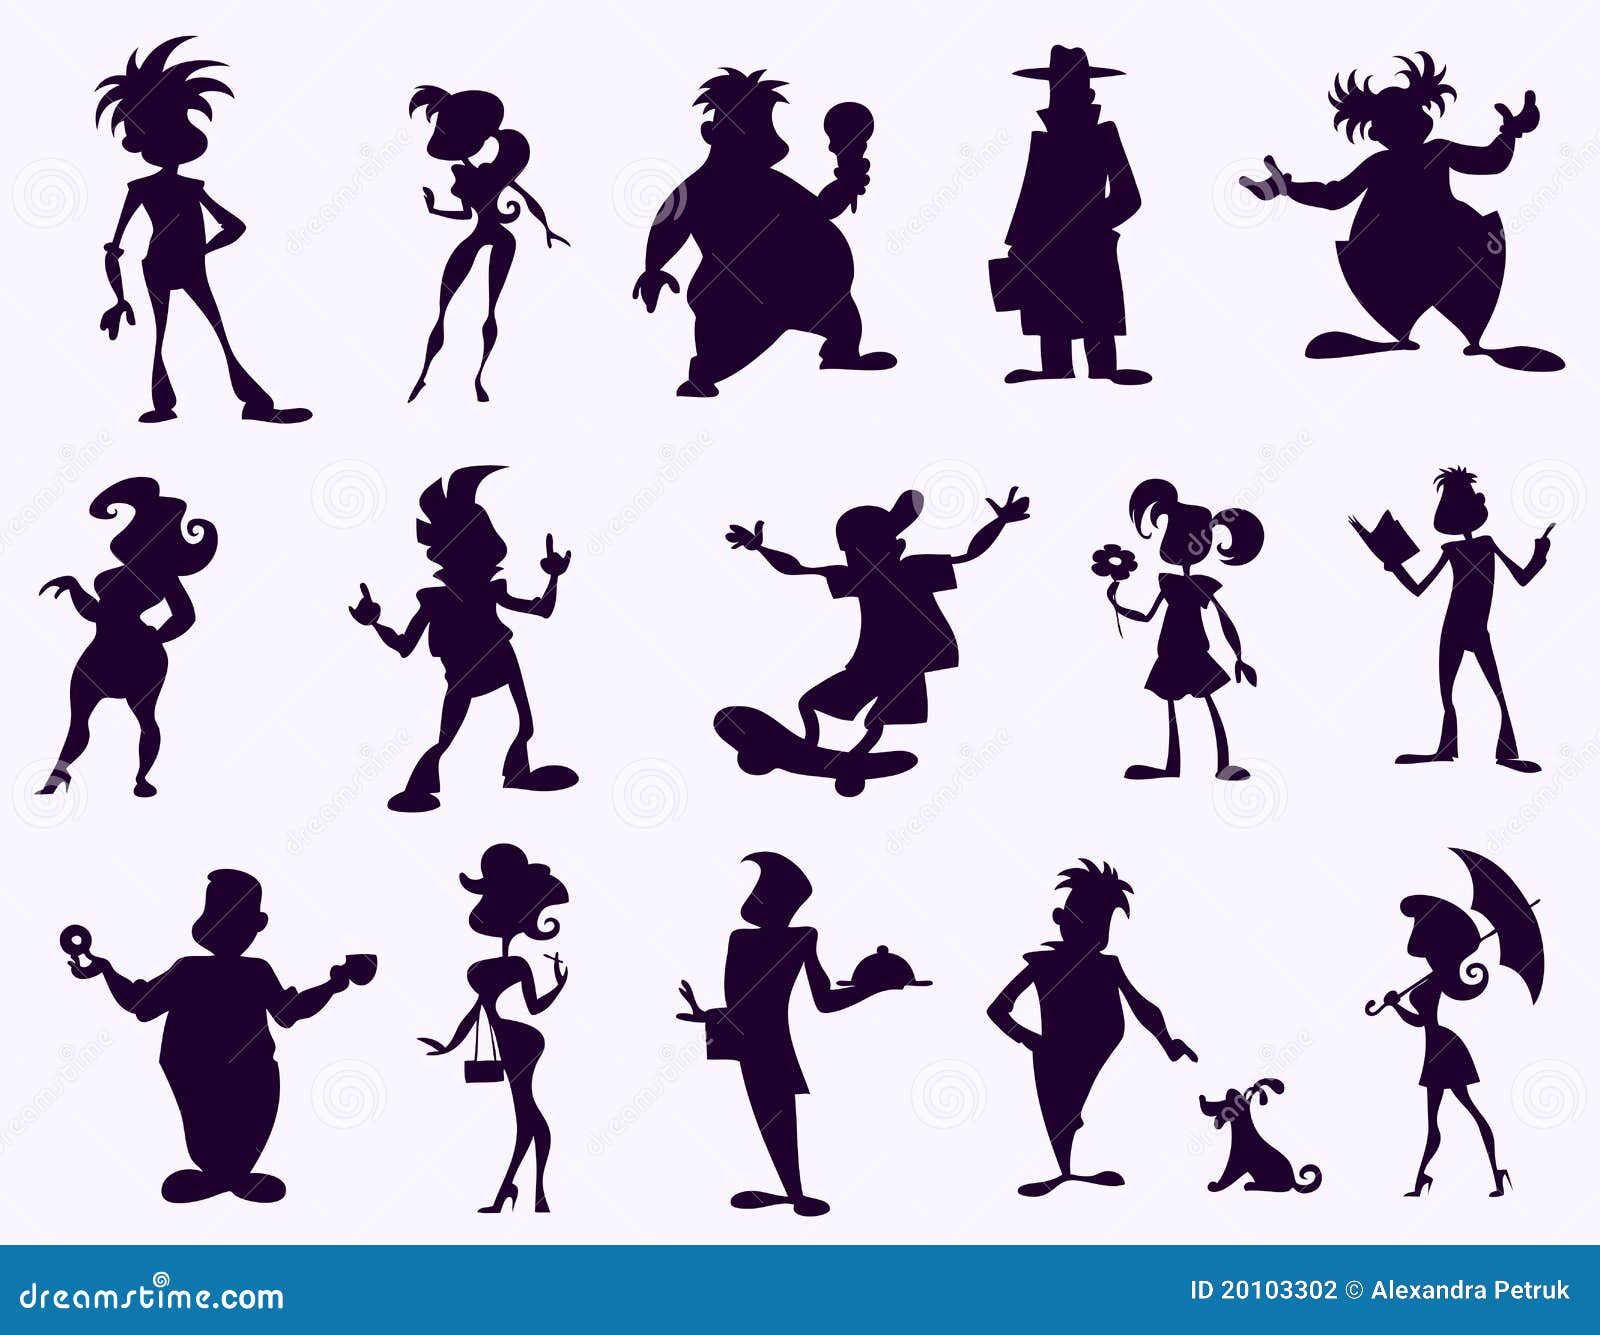 Funny Silhouette Svg